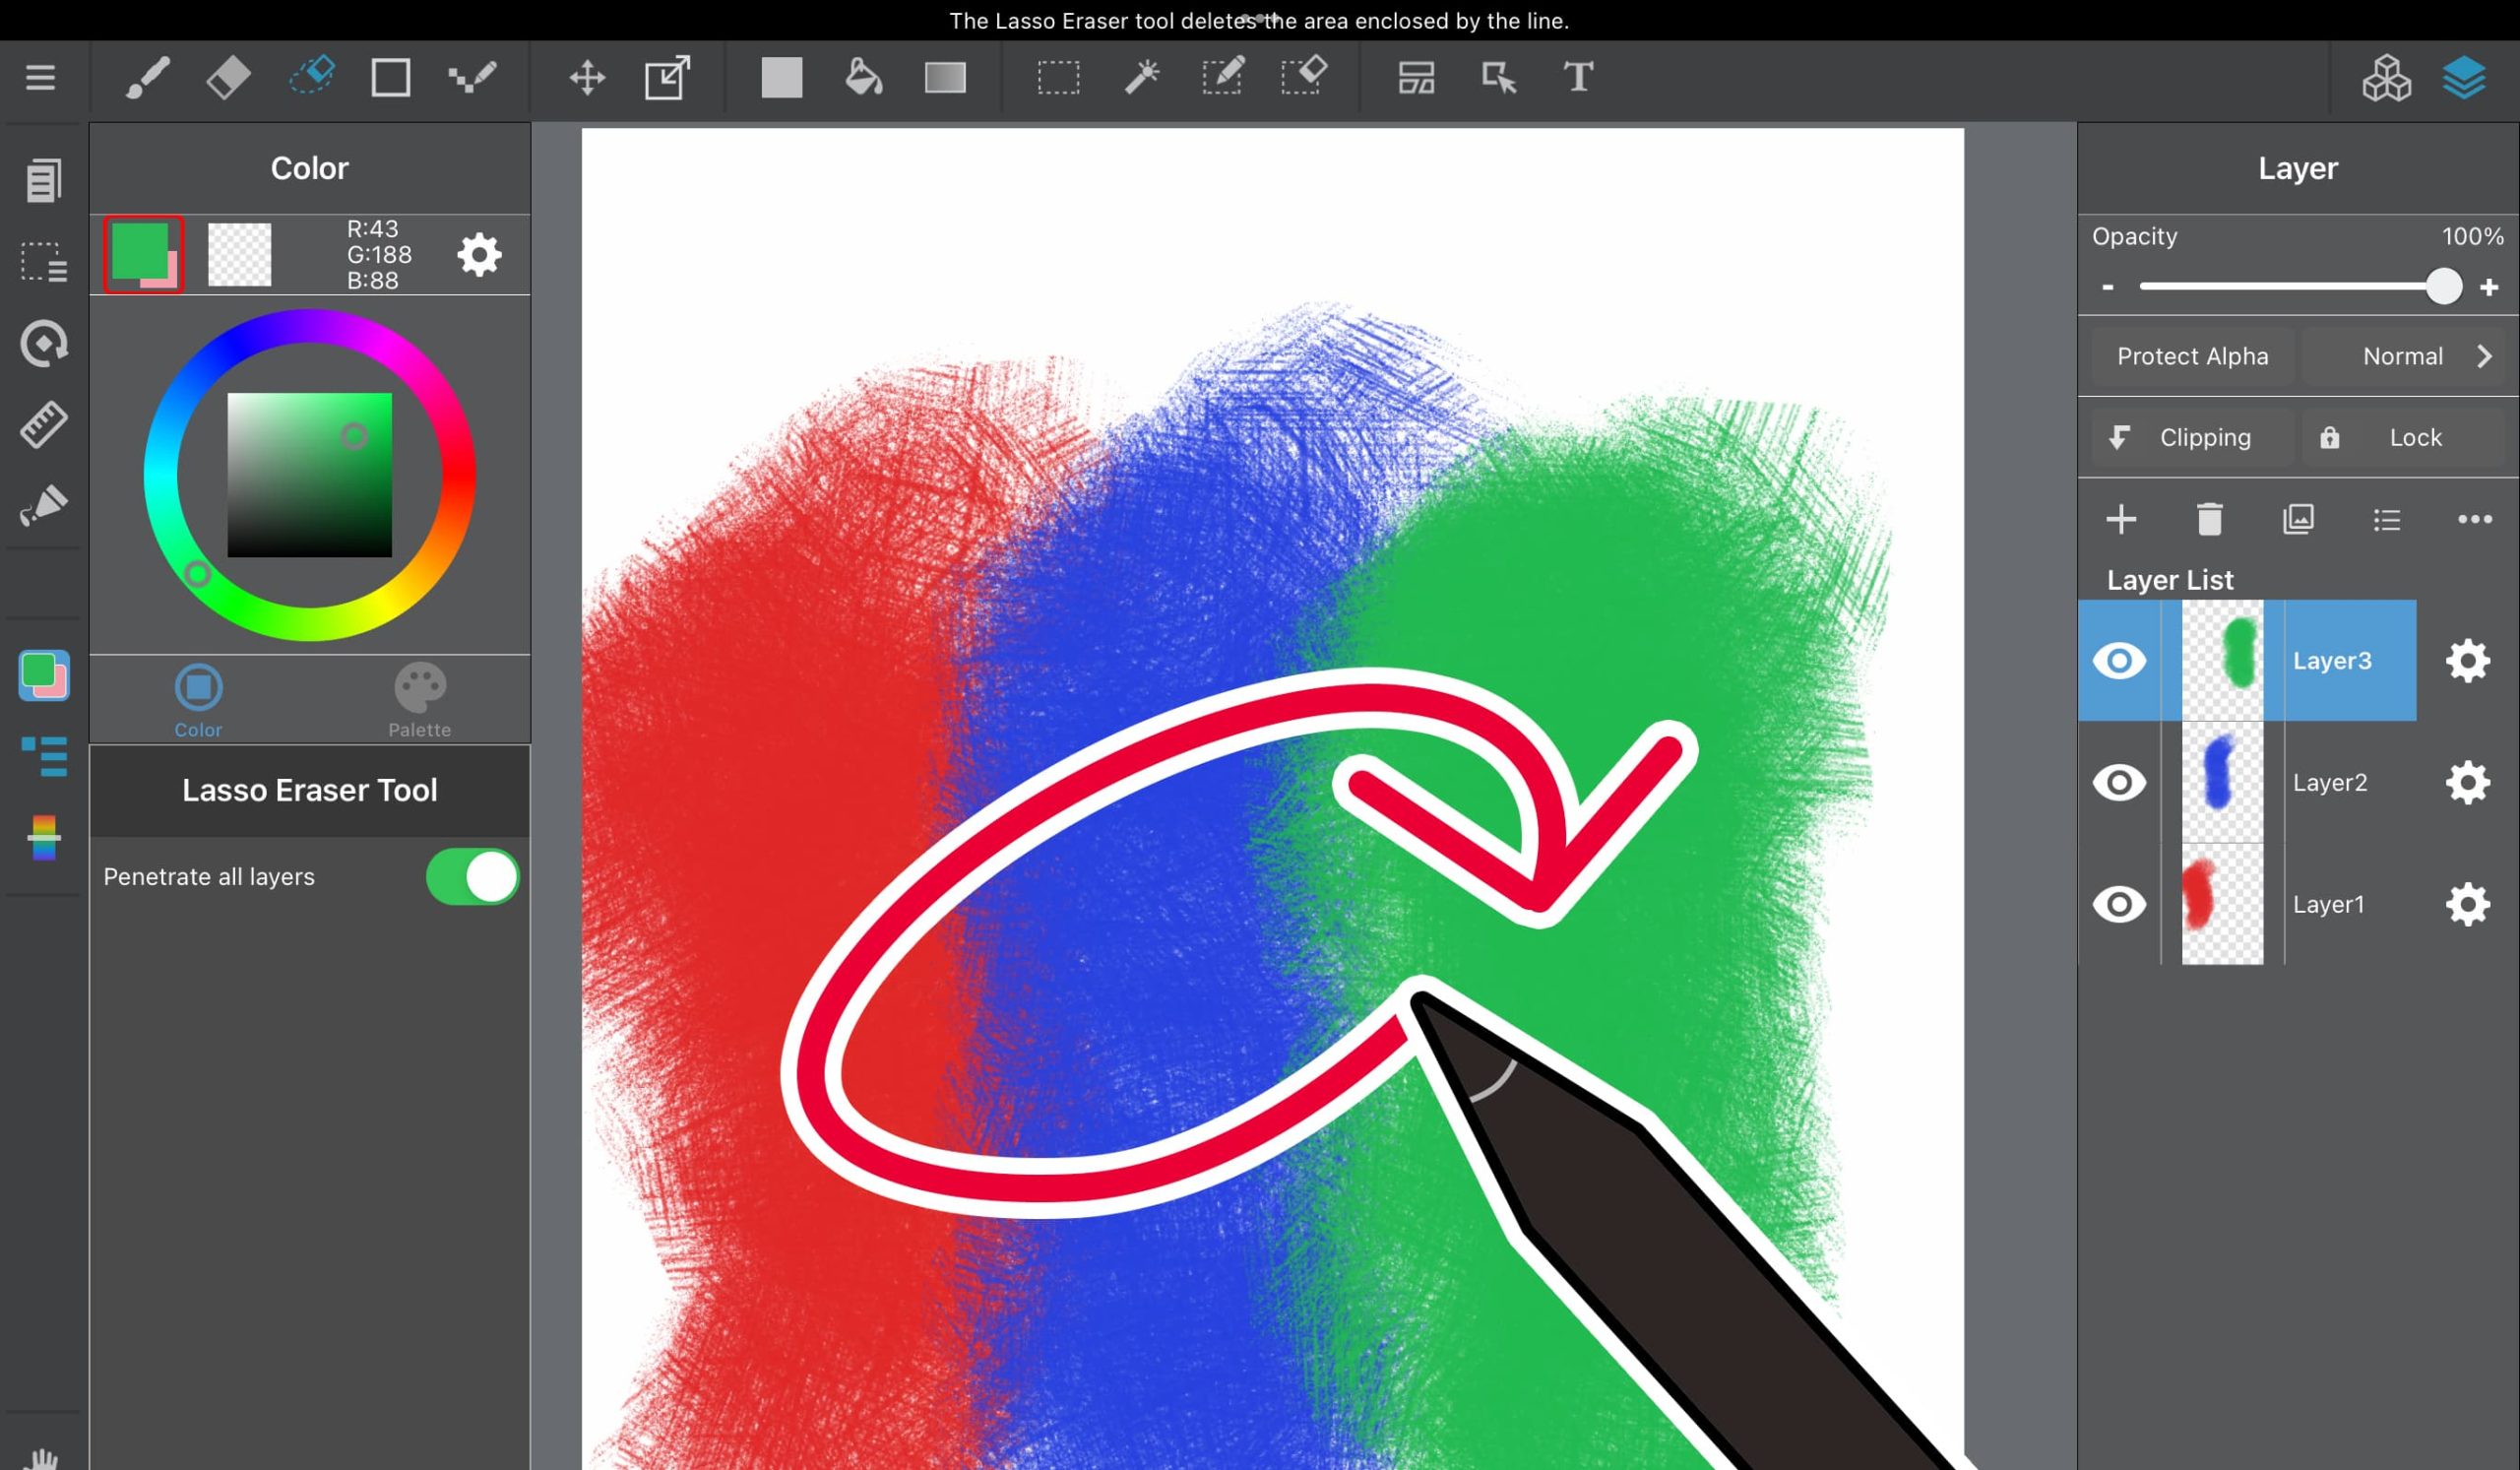 [iPad] How to Use the Eraser(Lasso) Tool - Penetrate all layers